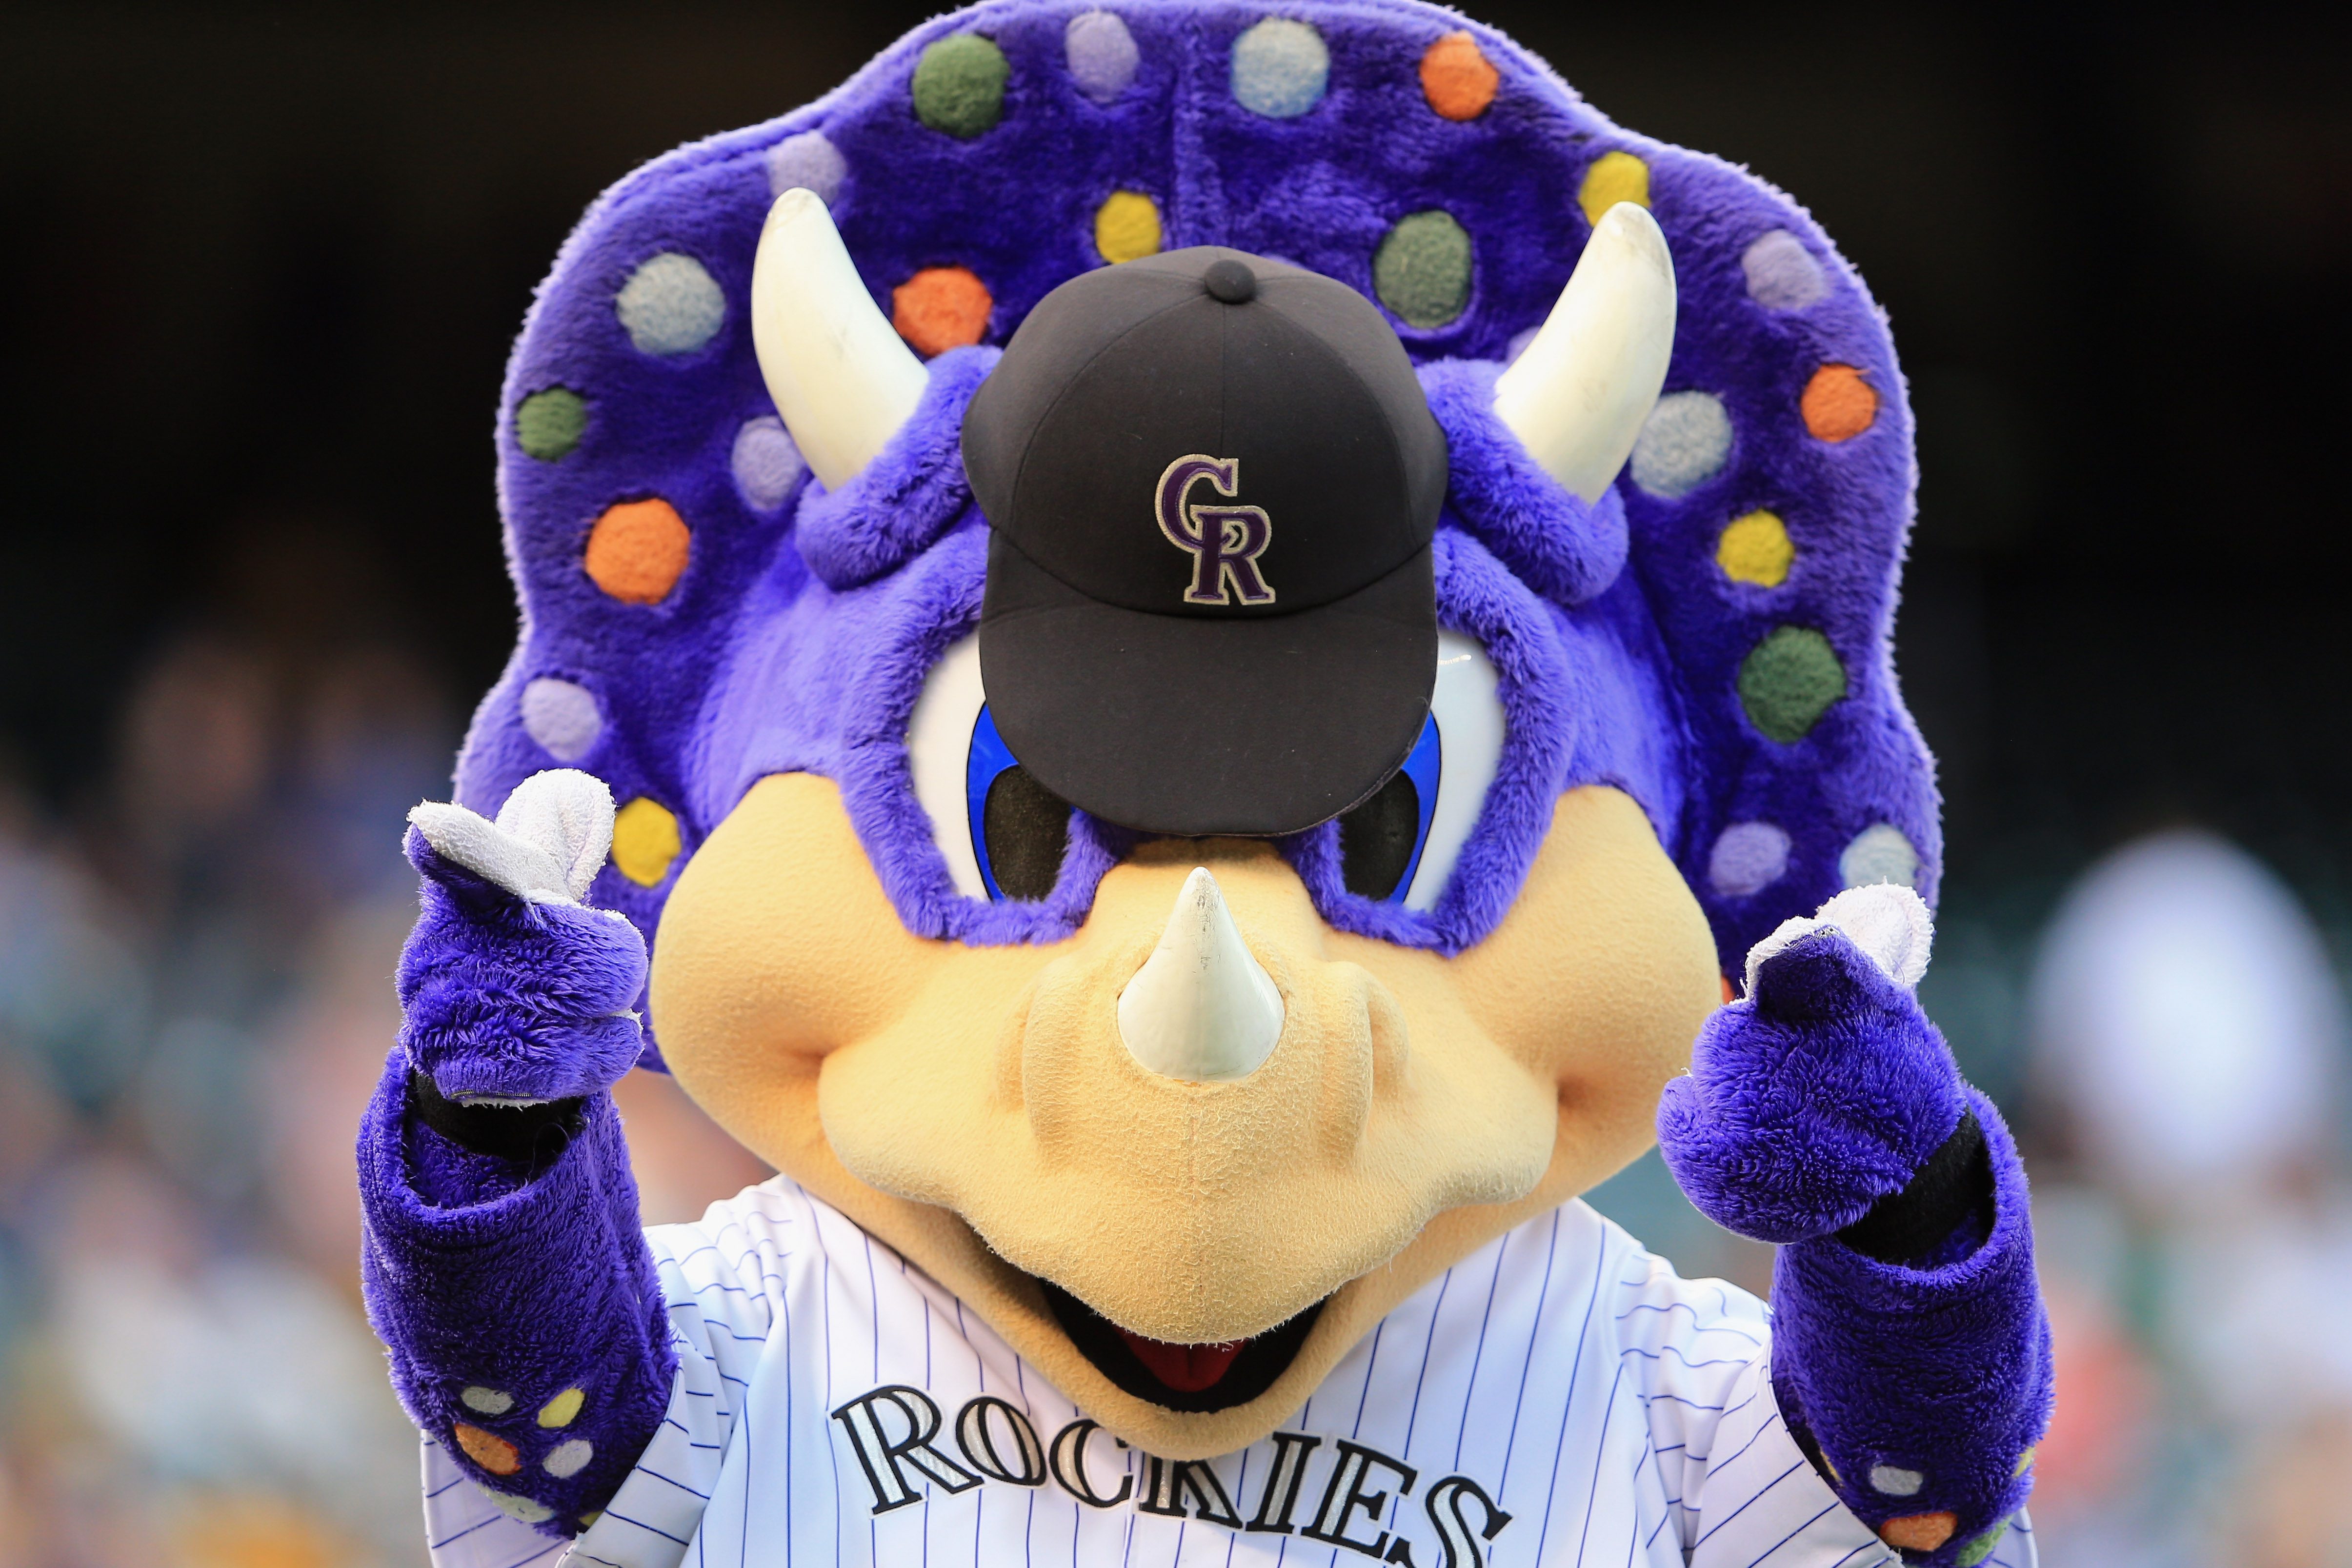 A close-up of Colorado Rockies mascot Dinger. Confusion Lingers About Colorado Fan Yelling at Mascot or Directing Racial Slur at Black Miami Player